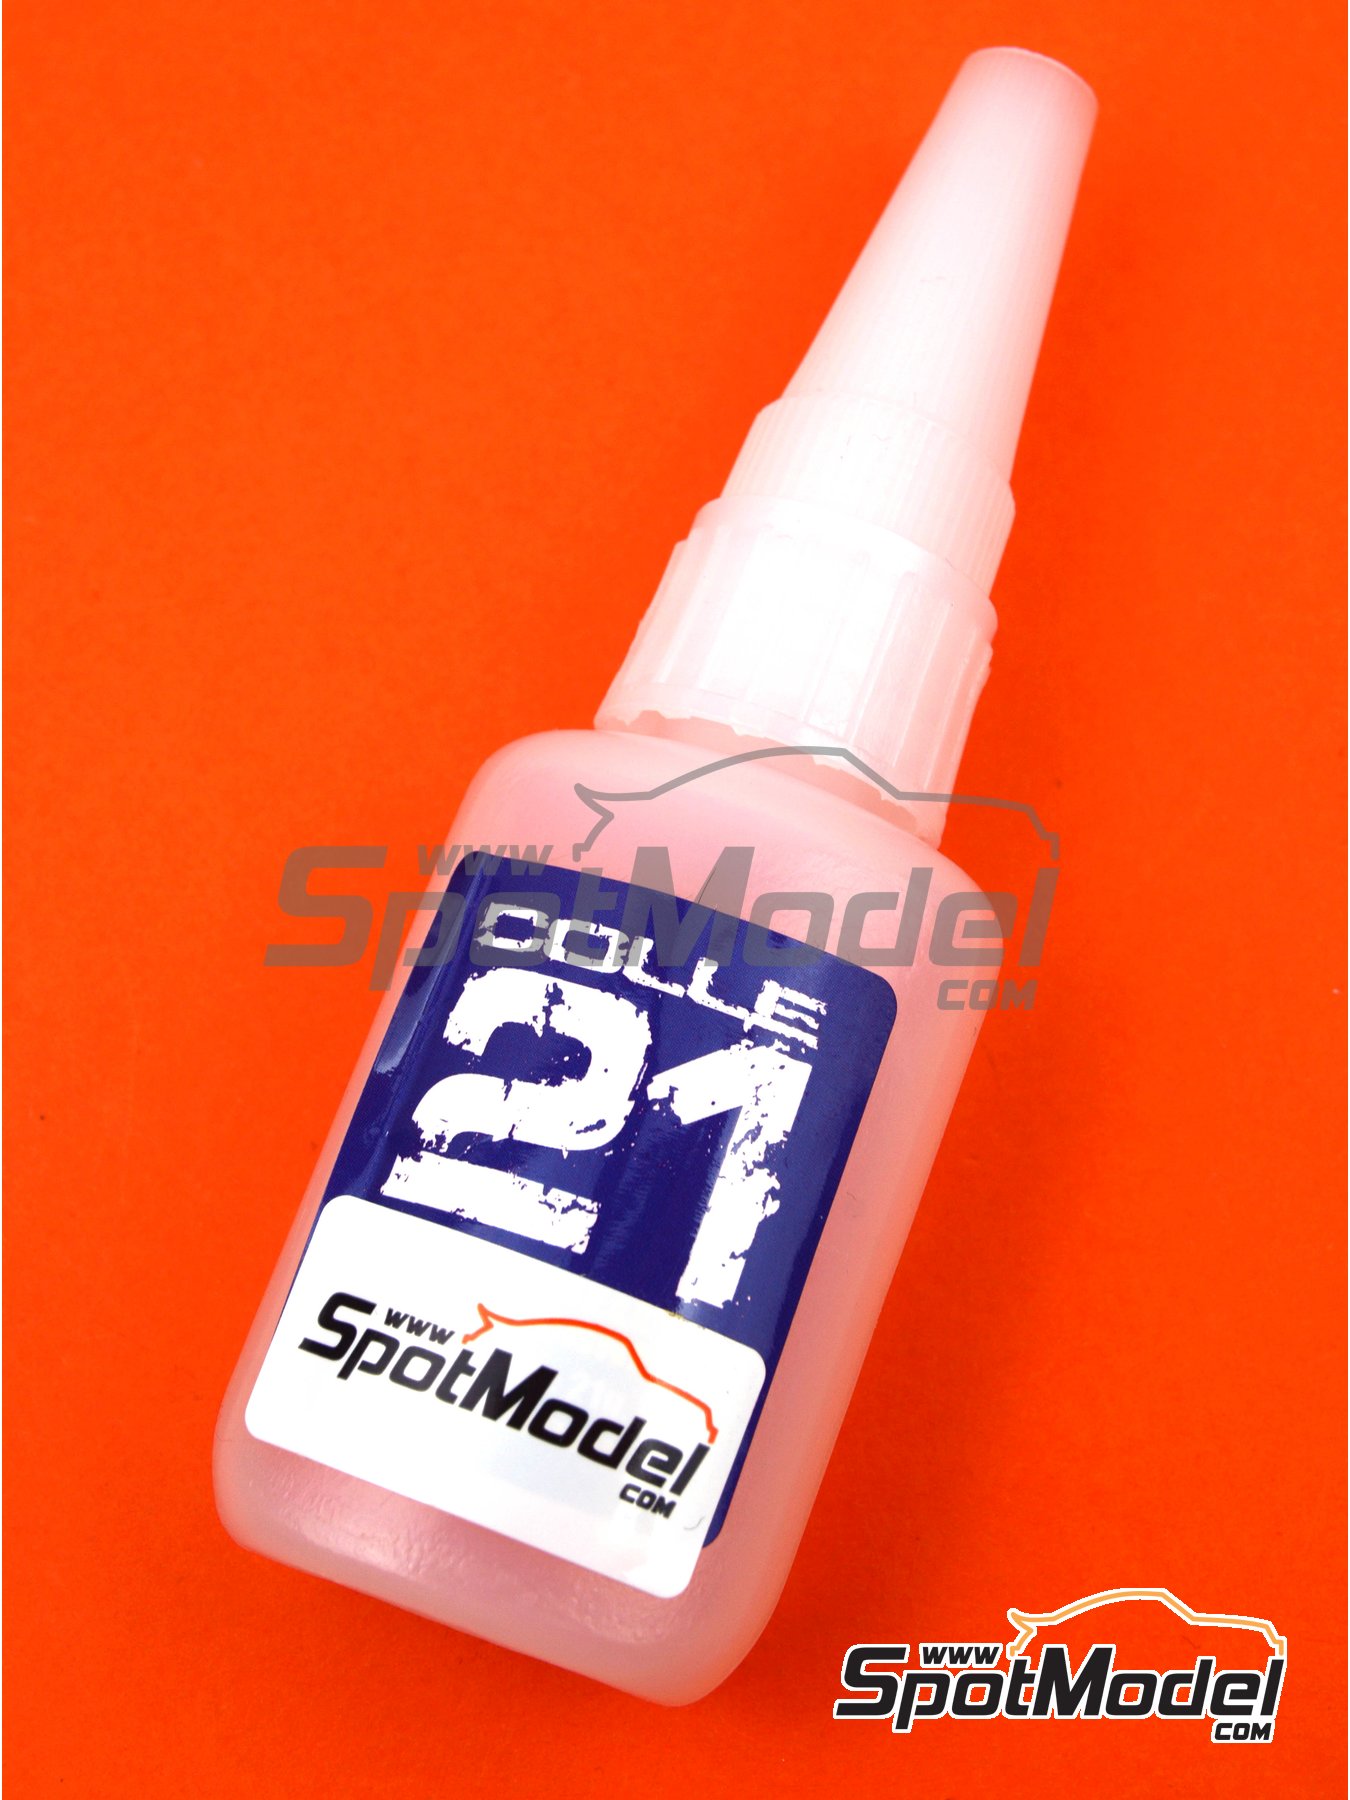 Colle 21 0001: Glue Colle 21 0001 1 x 21gr (ref. COLLE-0001)